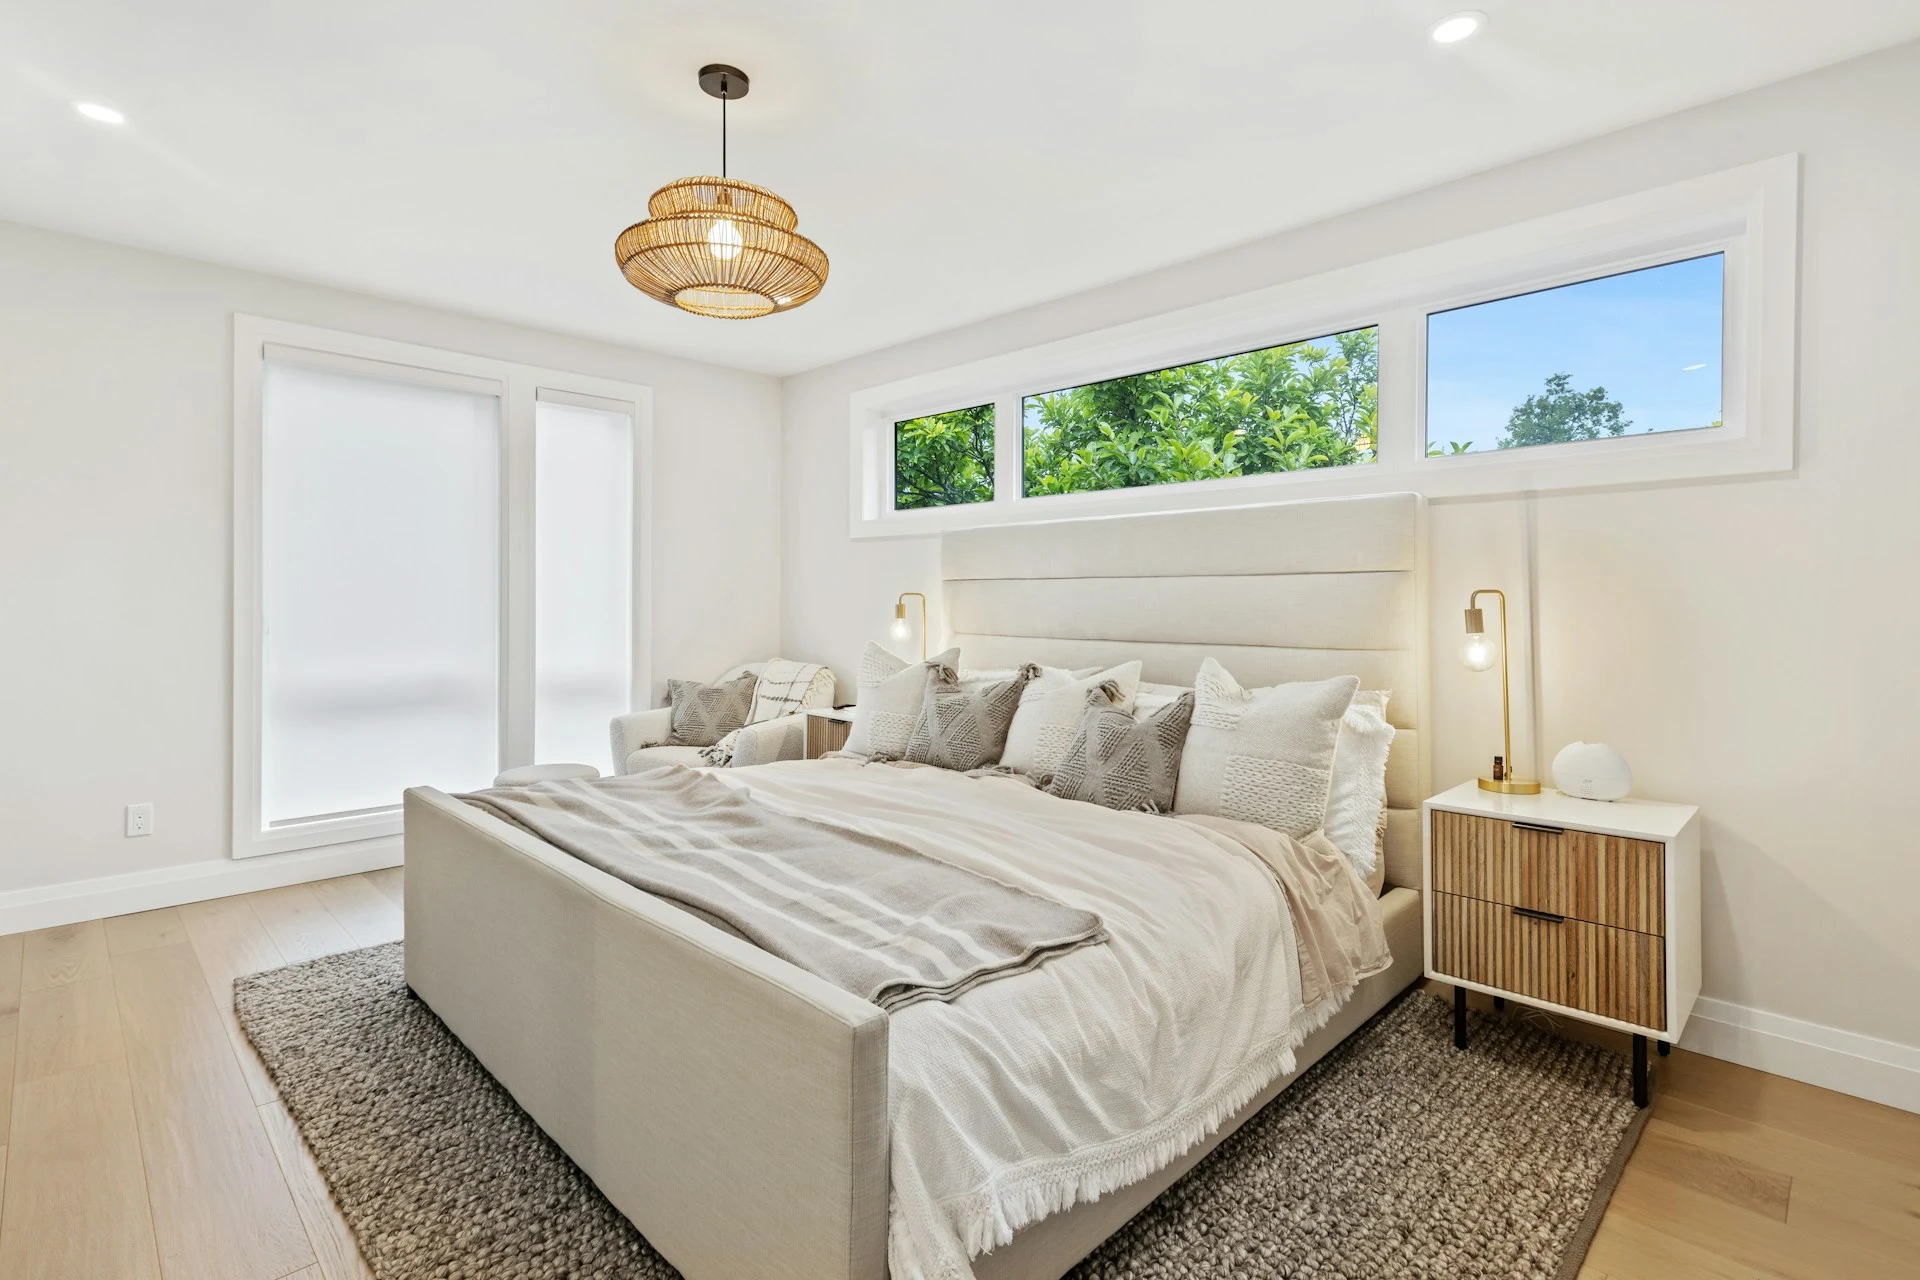 Tips for Ceiling Light Design to Match Your Room's Style